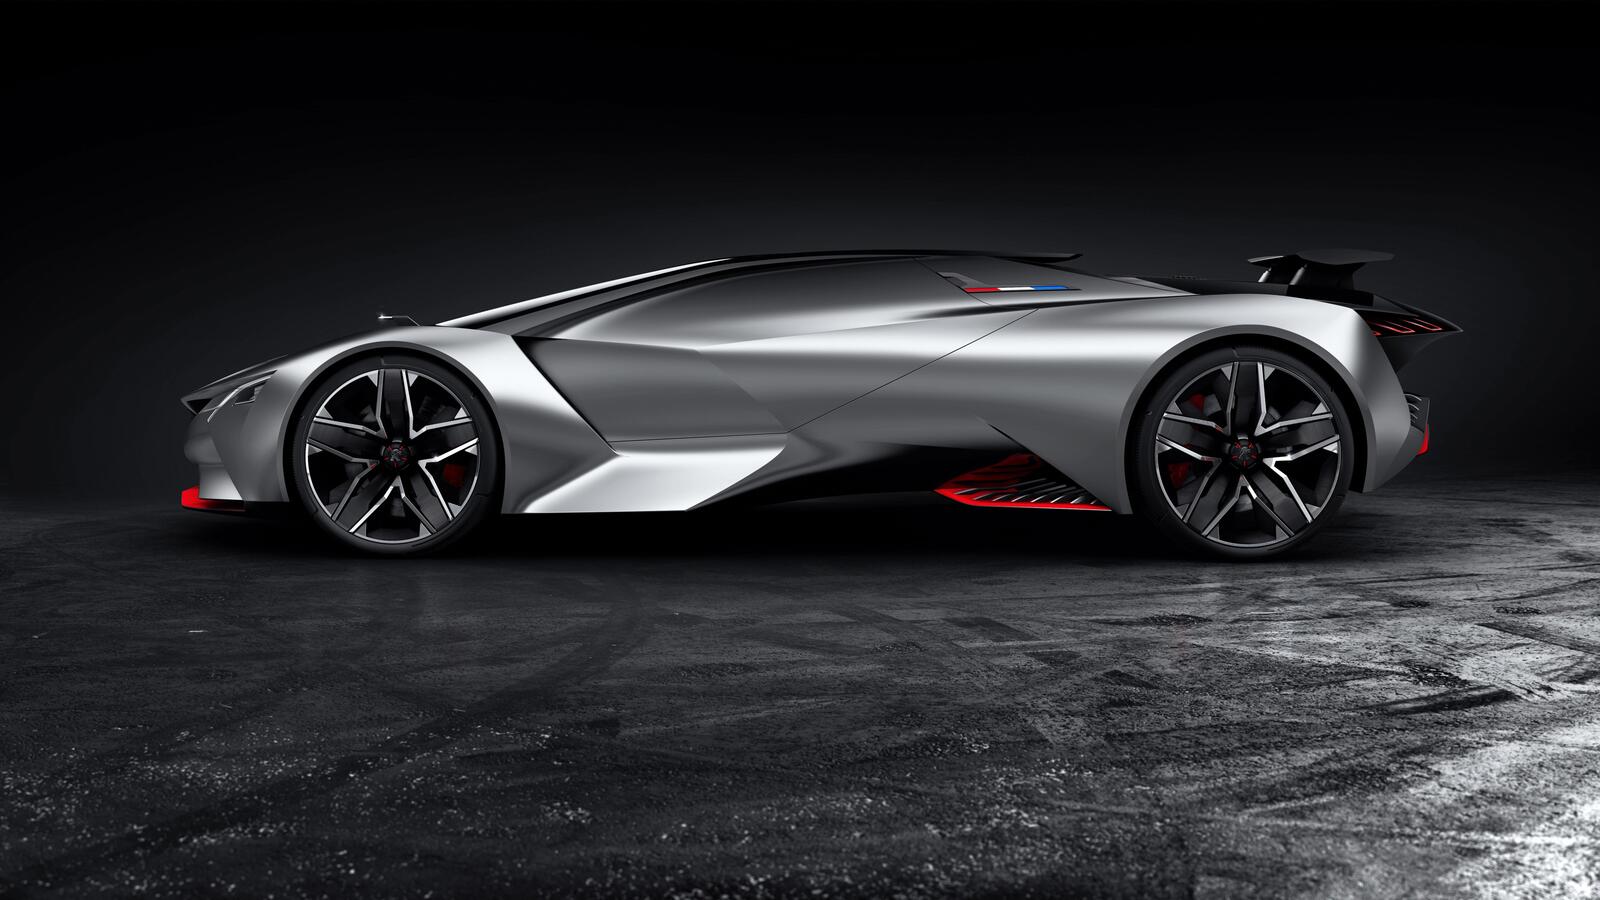 Wallpapers Peugeot cars concept cars on the desktop